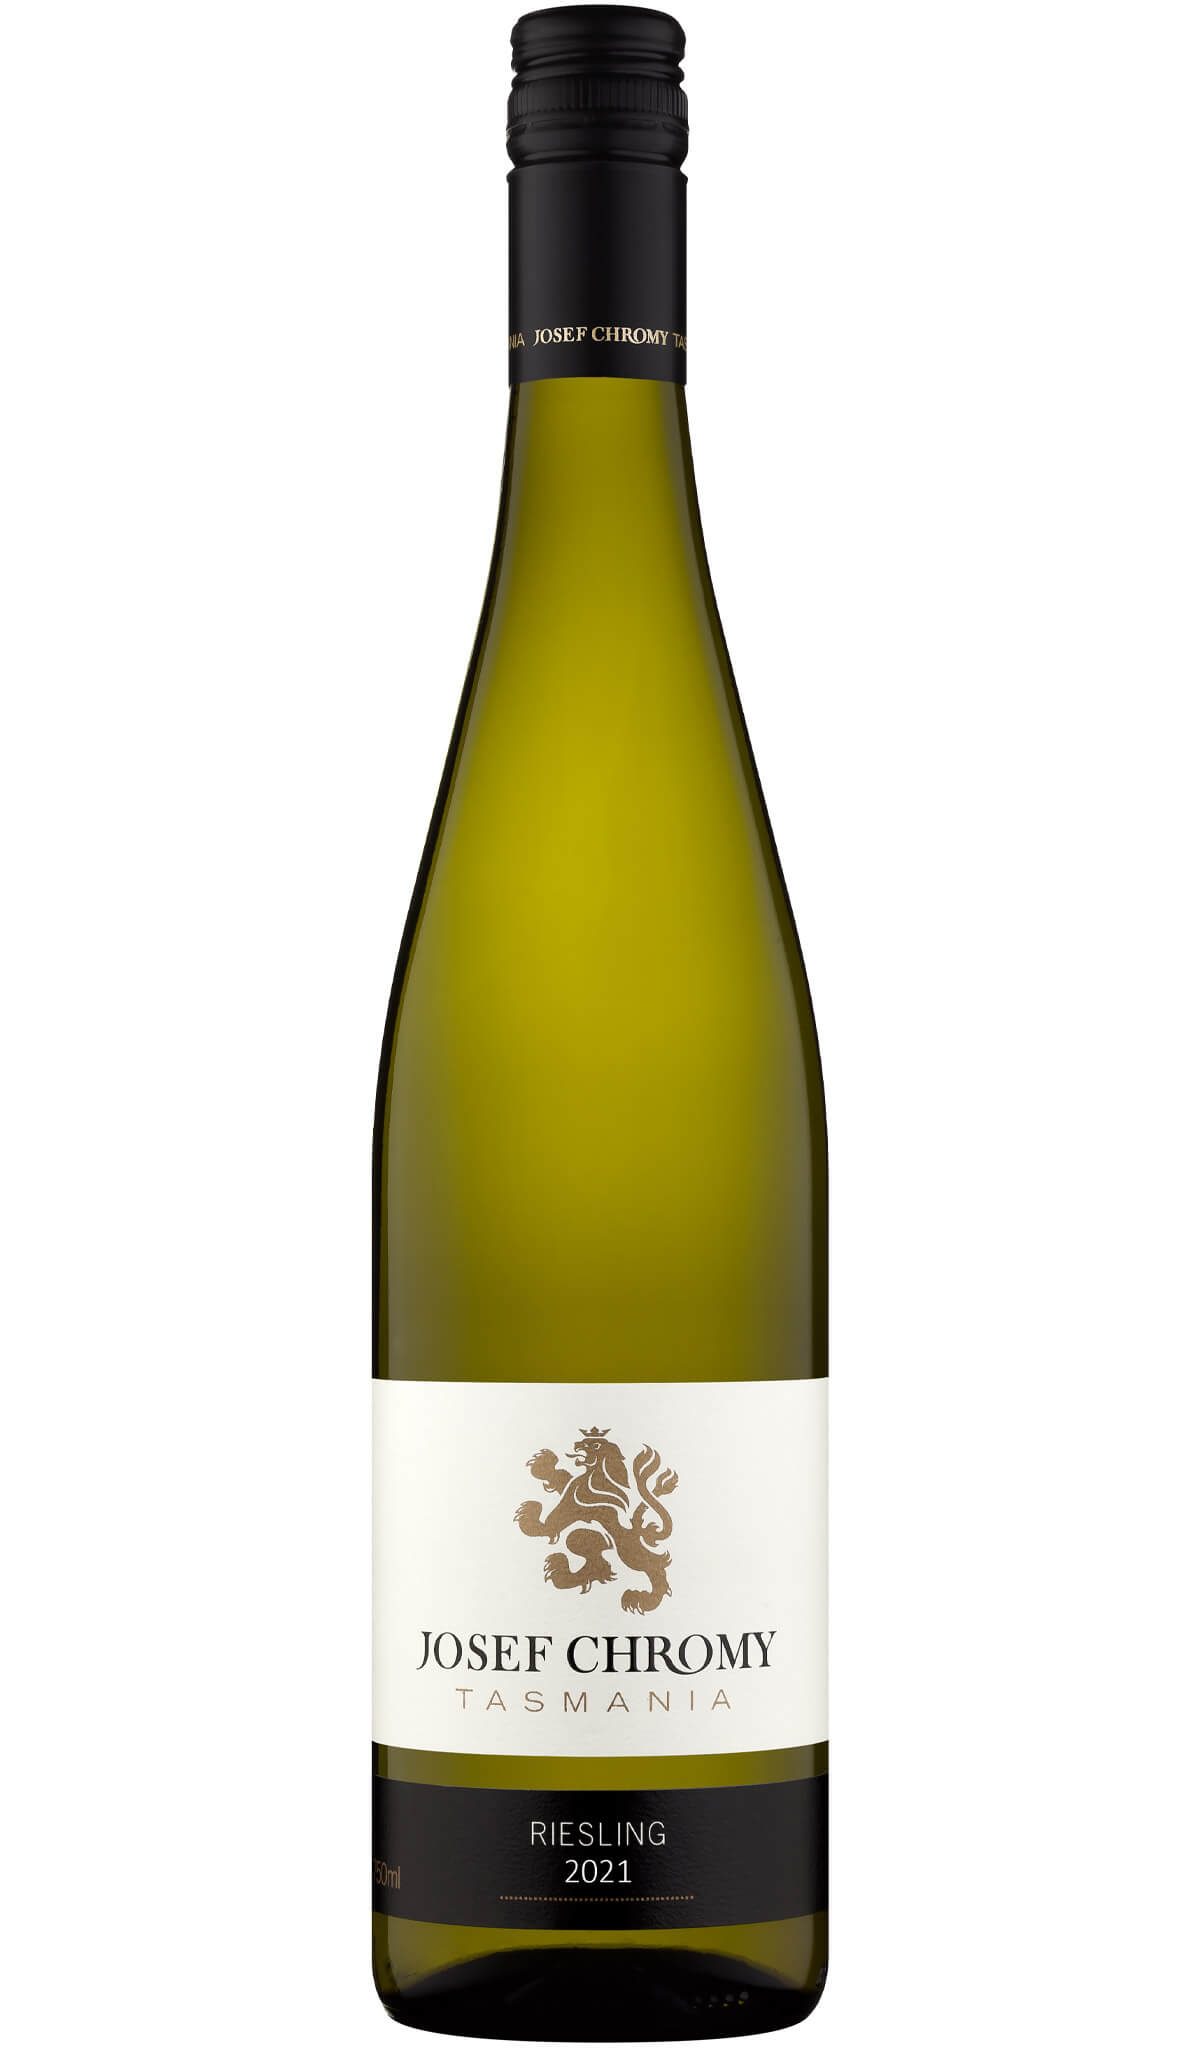 Find out more or buy Josef Chromy Riesling 2021 (Tasmania) online at Wine Sellers Direct - Australia’s independent liquor specialists.